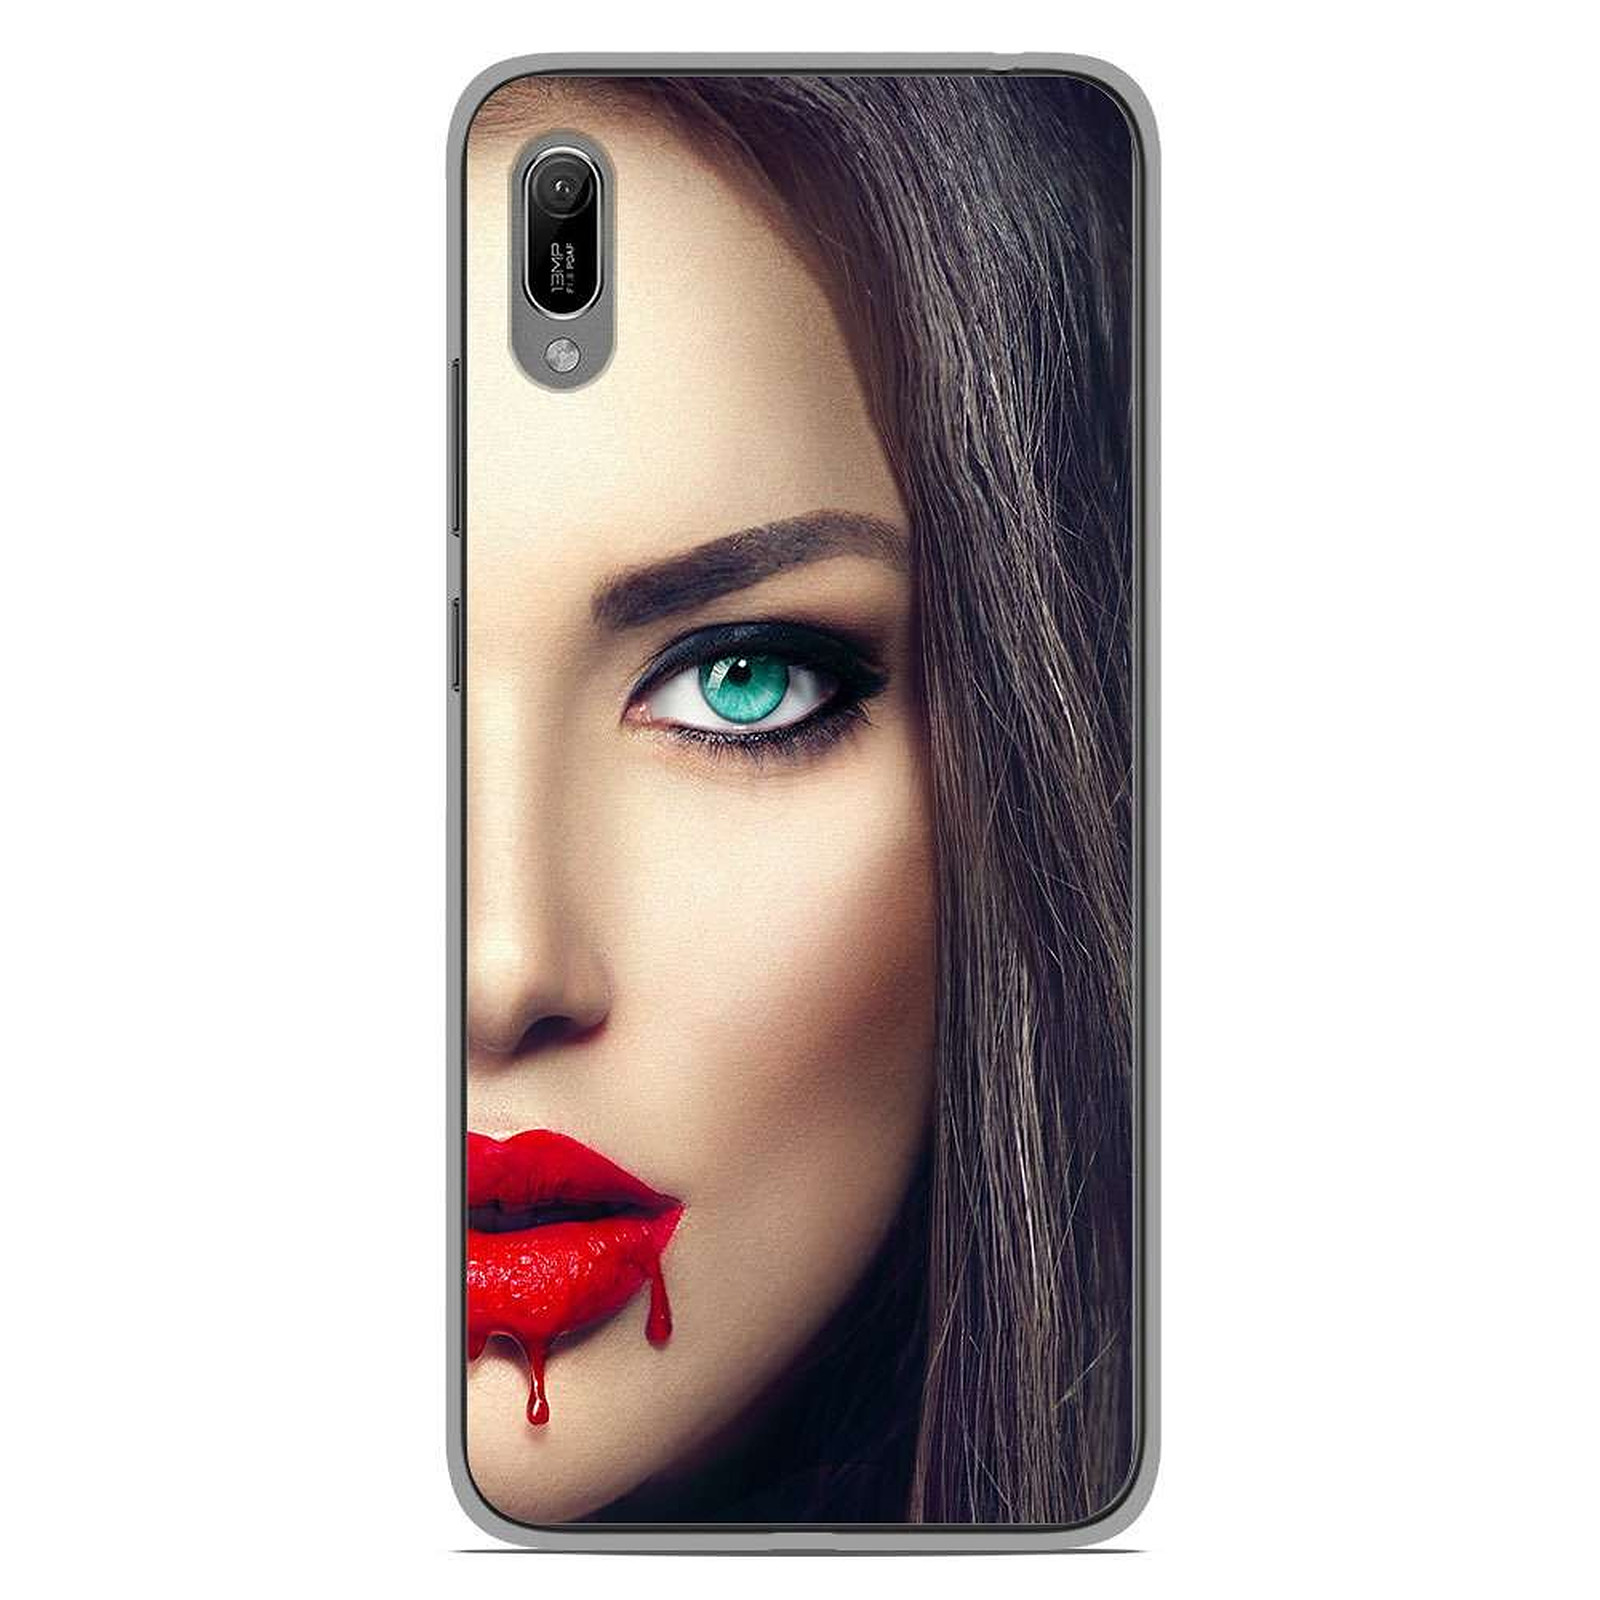 1001 Coques Coque silicone gel Huawei Y6 2019 motif Lèvres Sang - Coque telephone 1001Coques